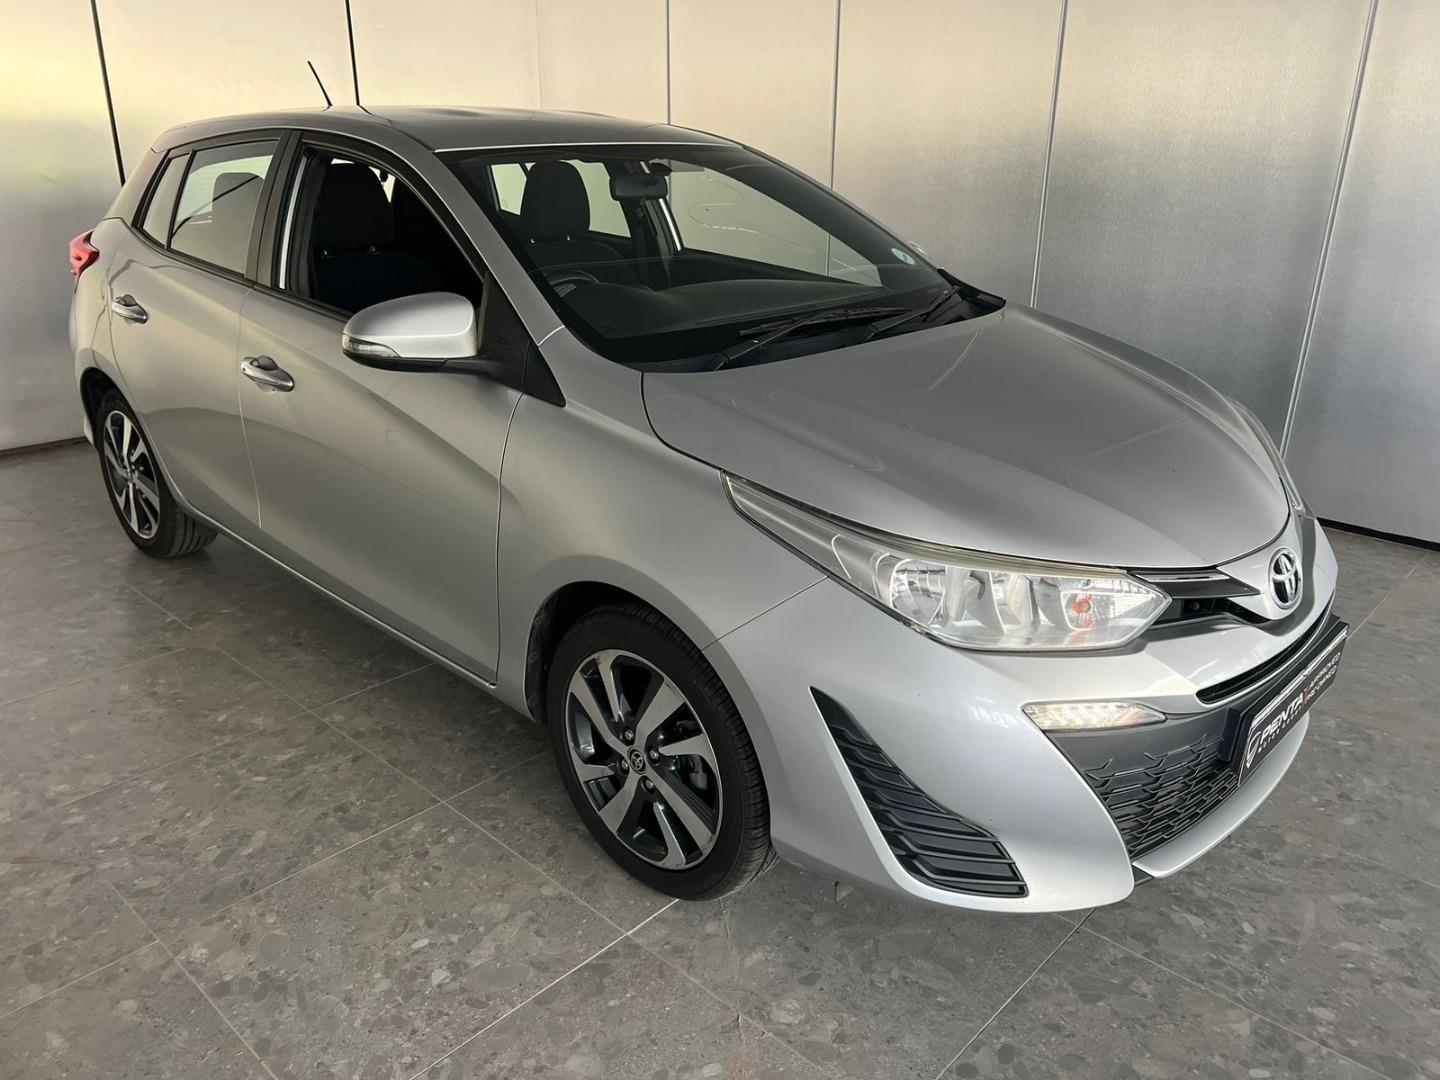 2019 Toyota Yaris 1.5 Xs auto For Sale